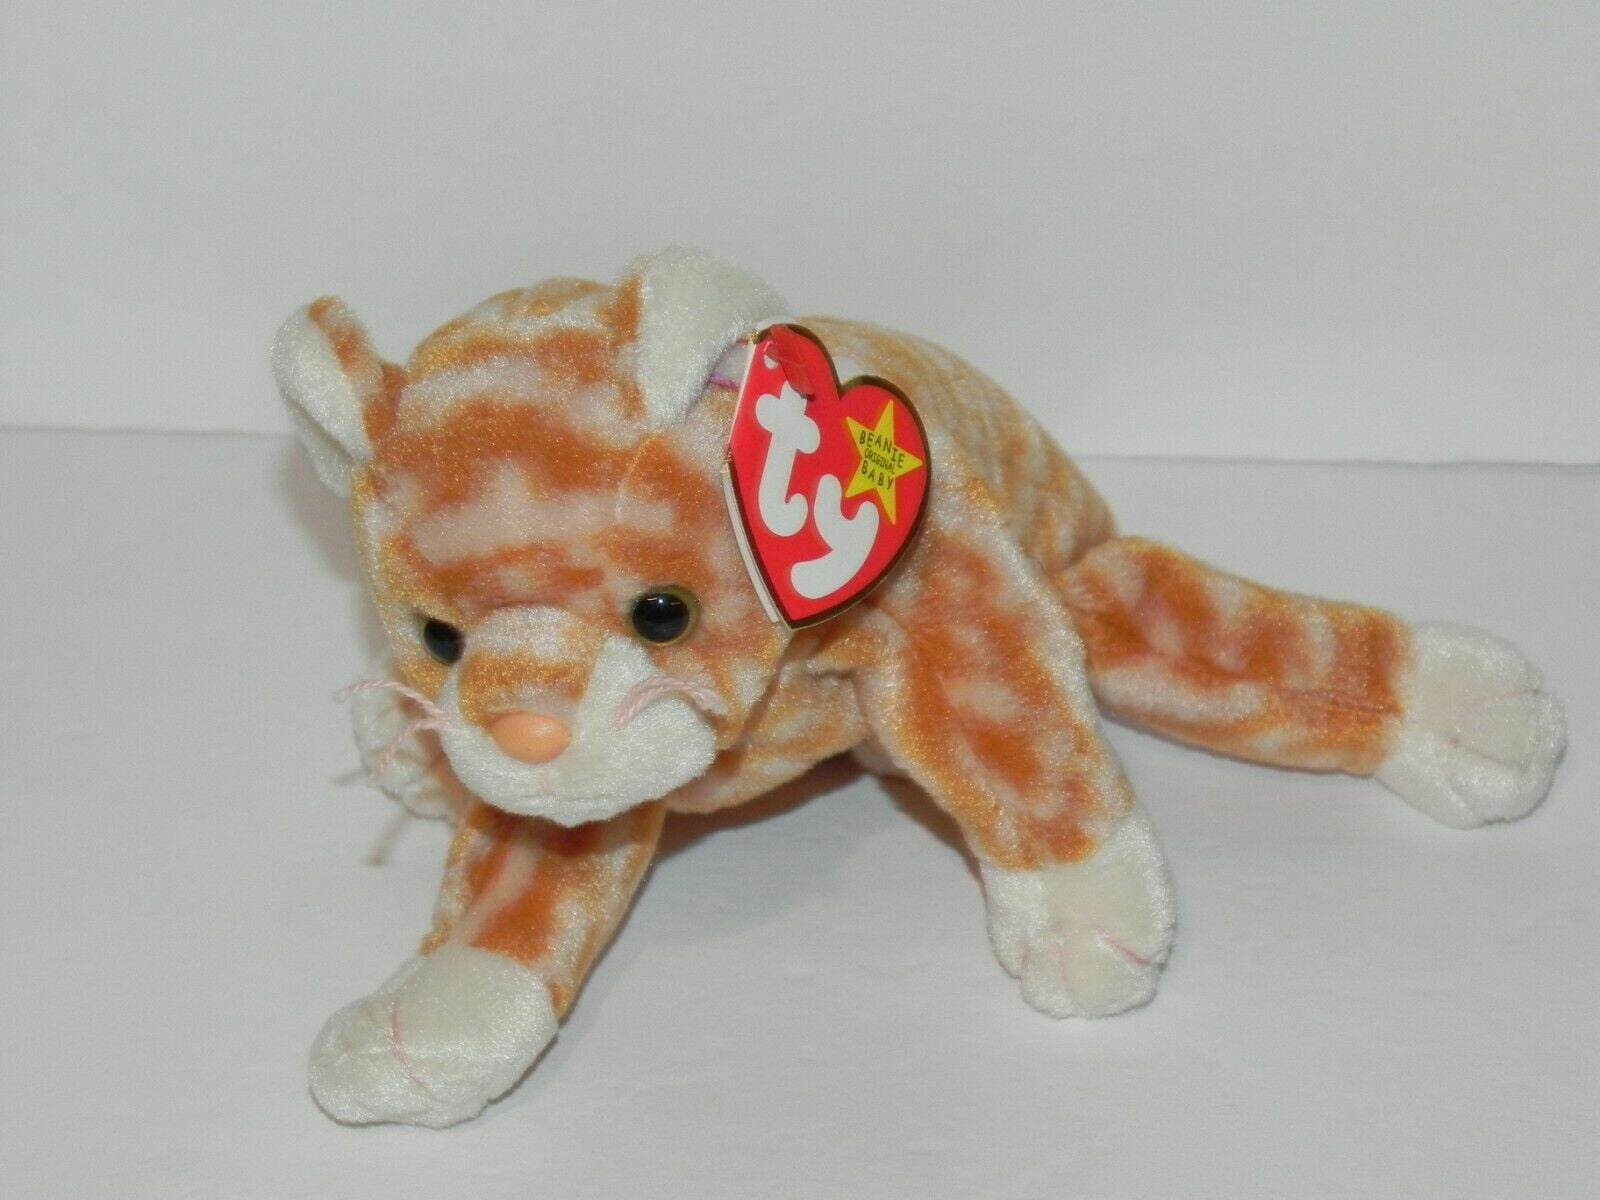 Ty Beanie Buddy Cat Named Amber Orange Tabby 3rd Generation MINT Plush Toy for sale online 